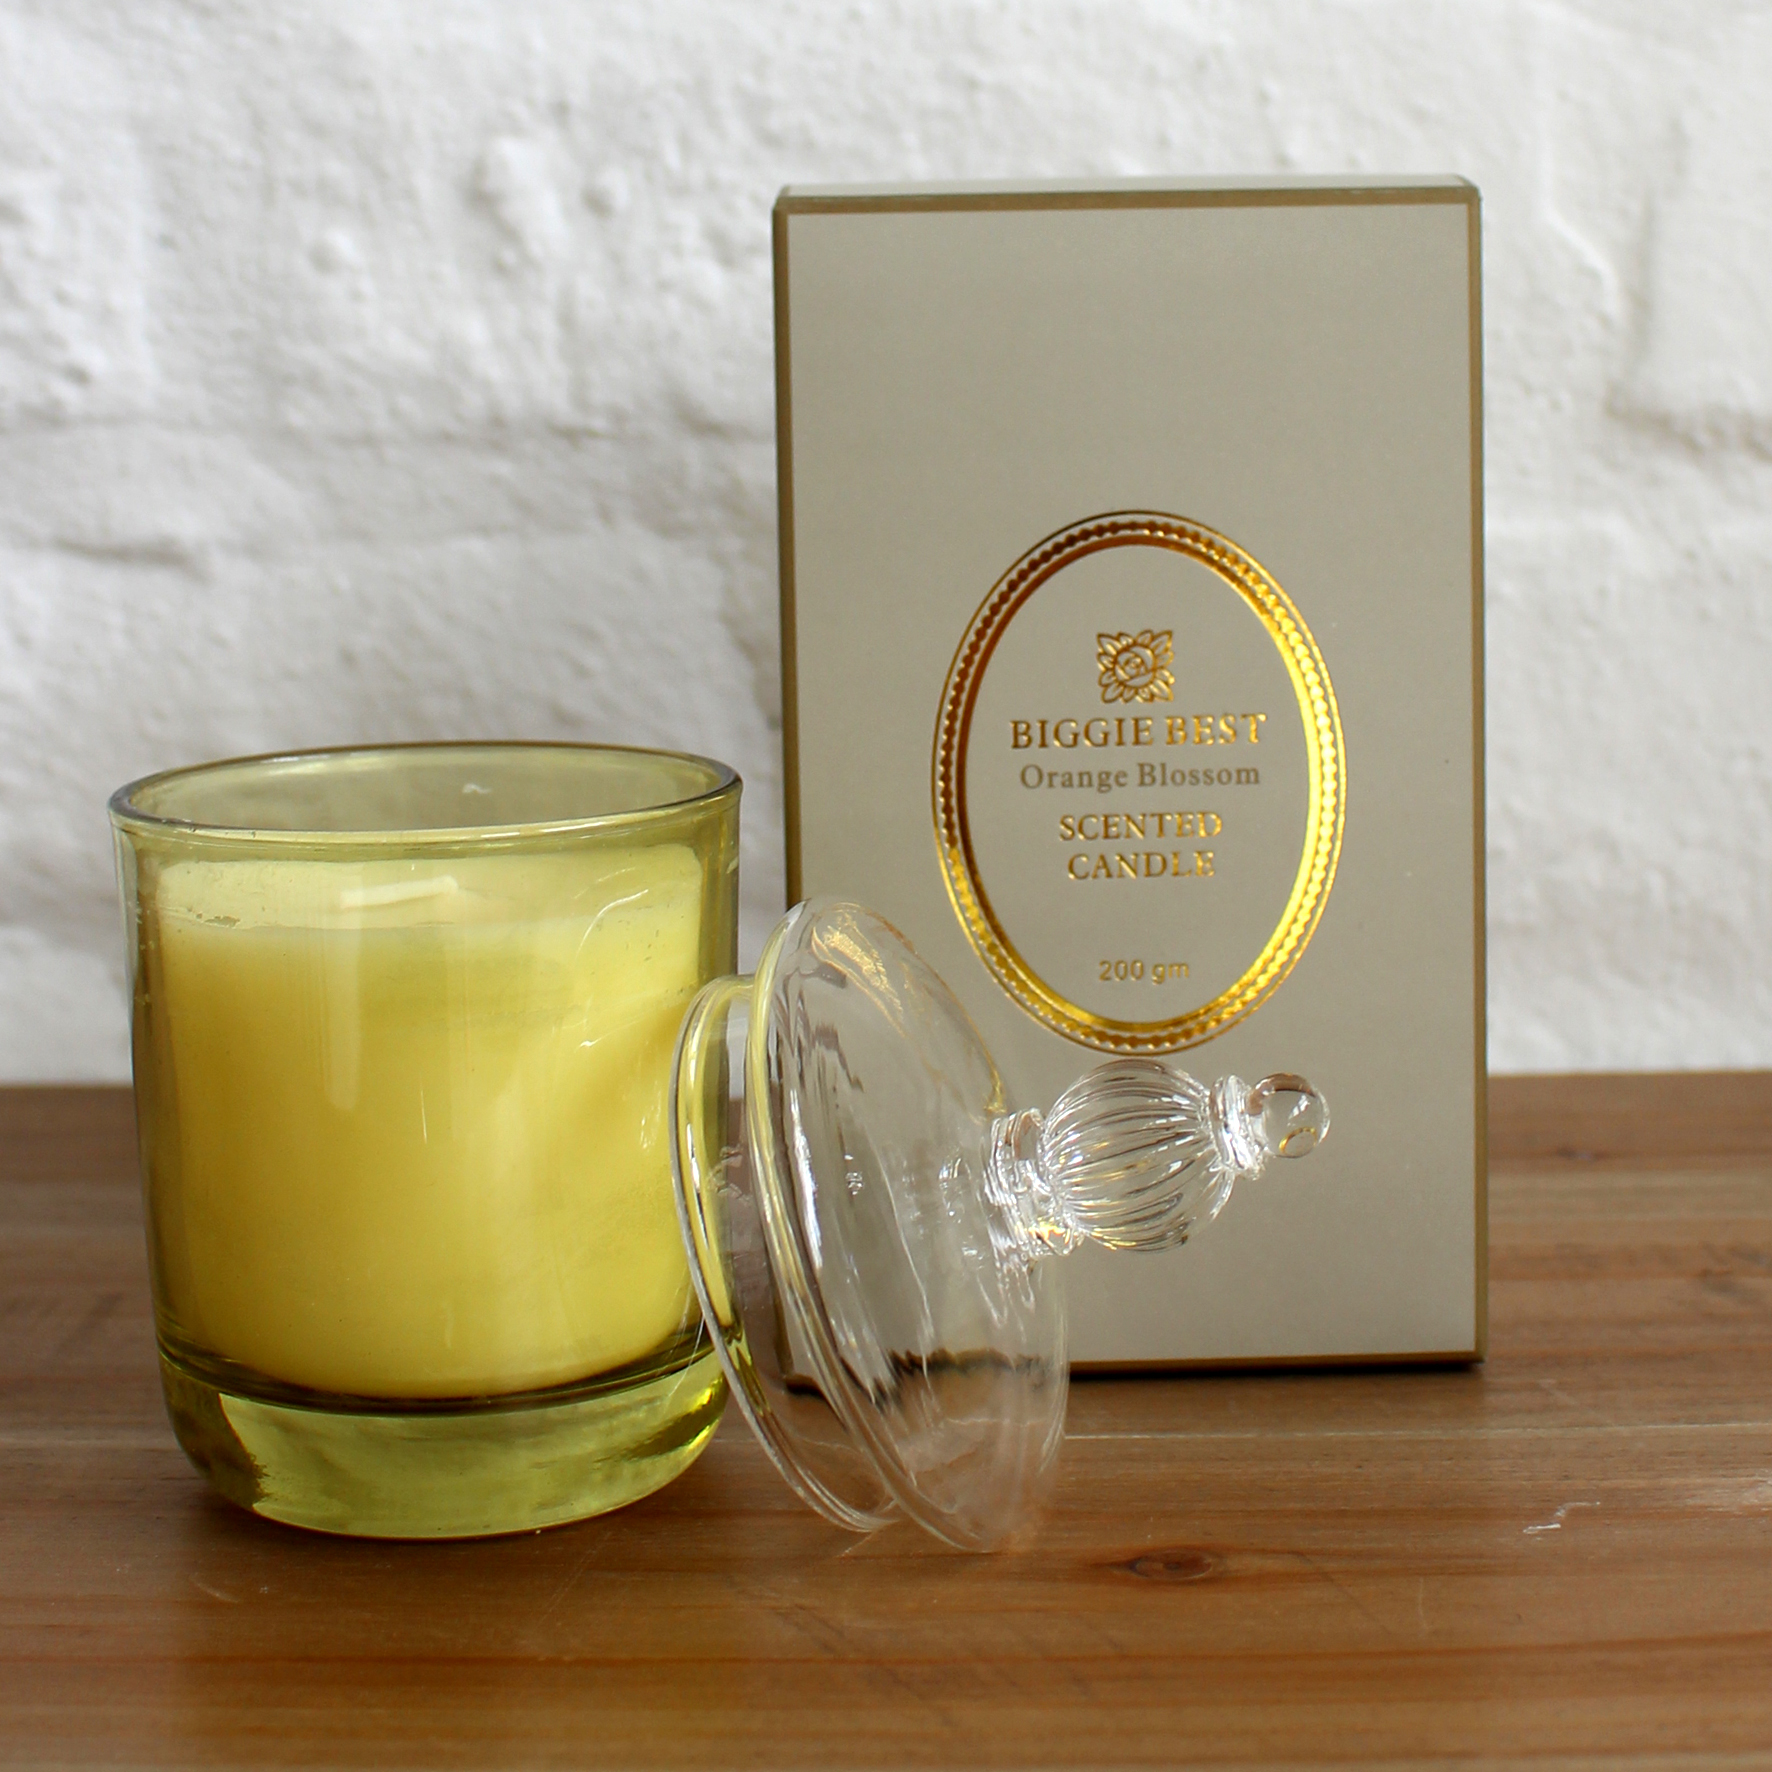 ORANGE BLOSSOM Scented Glass Candle